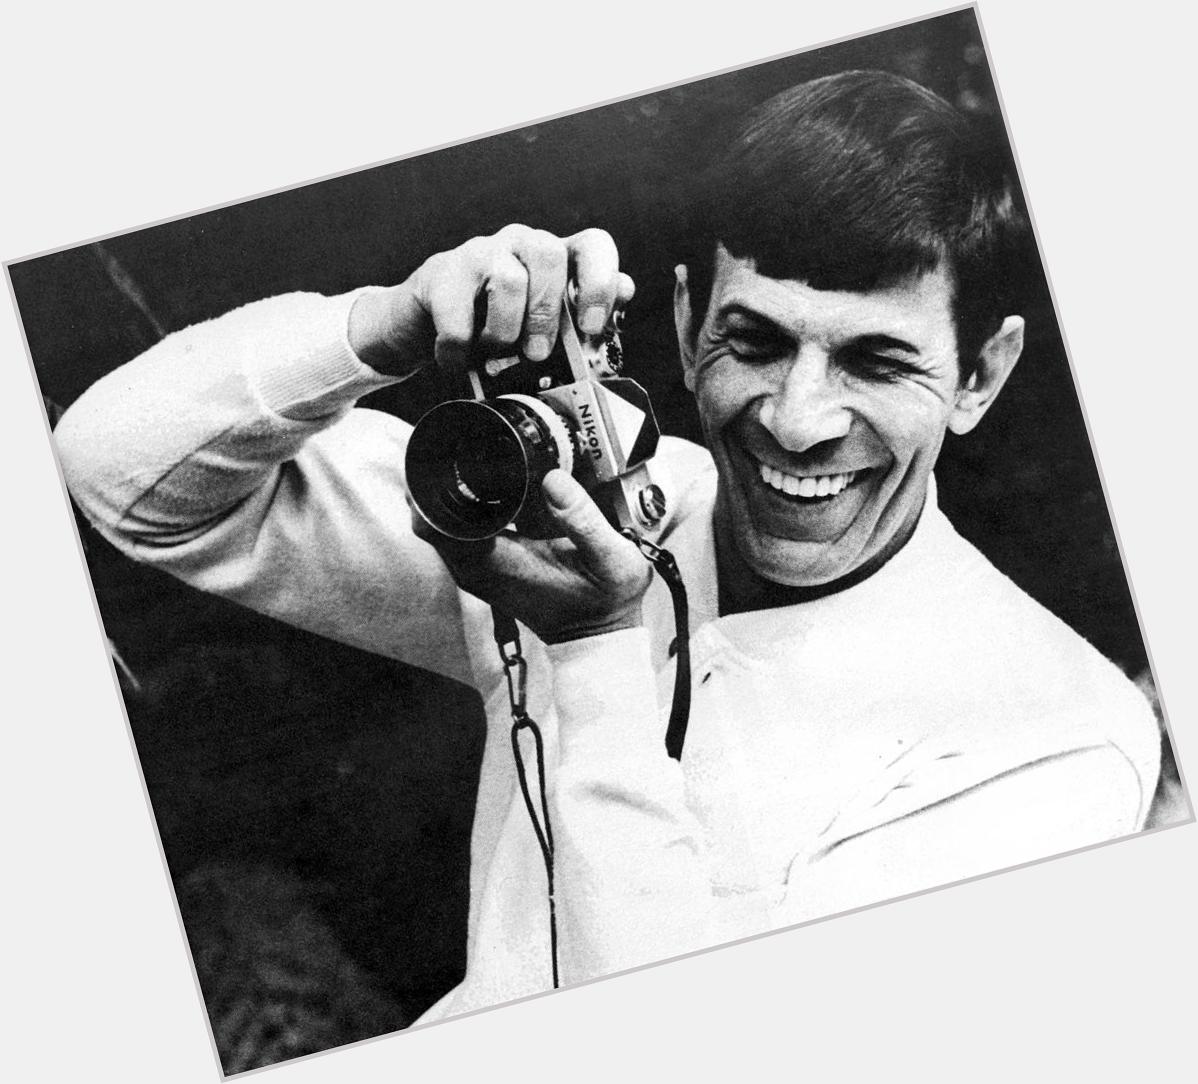 Remembering Leonard Nimoy on what would have been his 84th birthday. Happy birthday Leonard! 